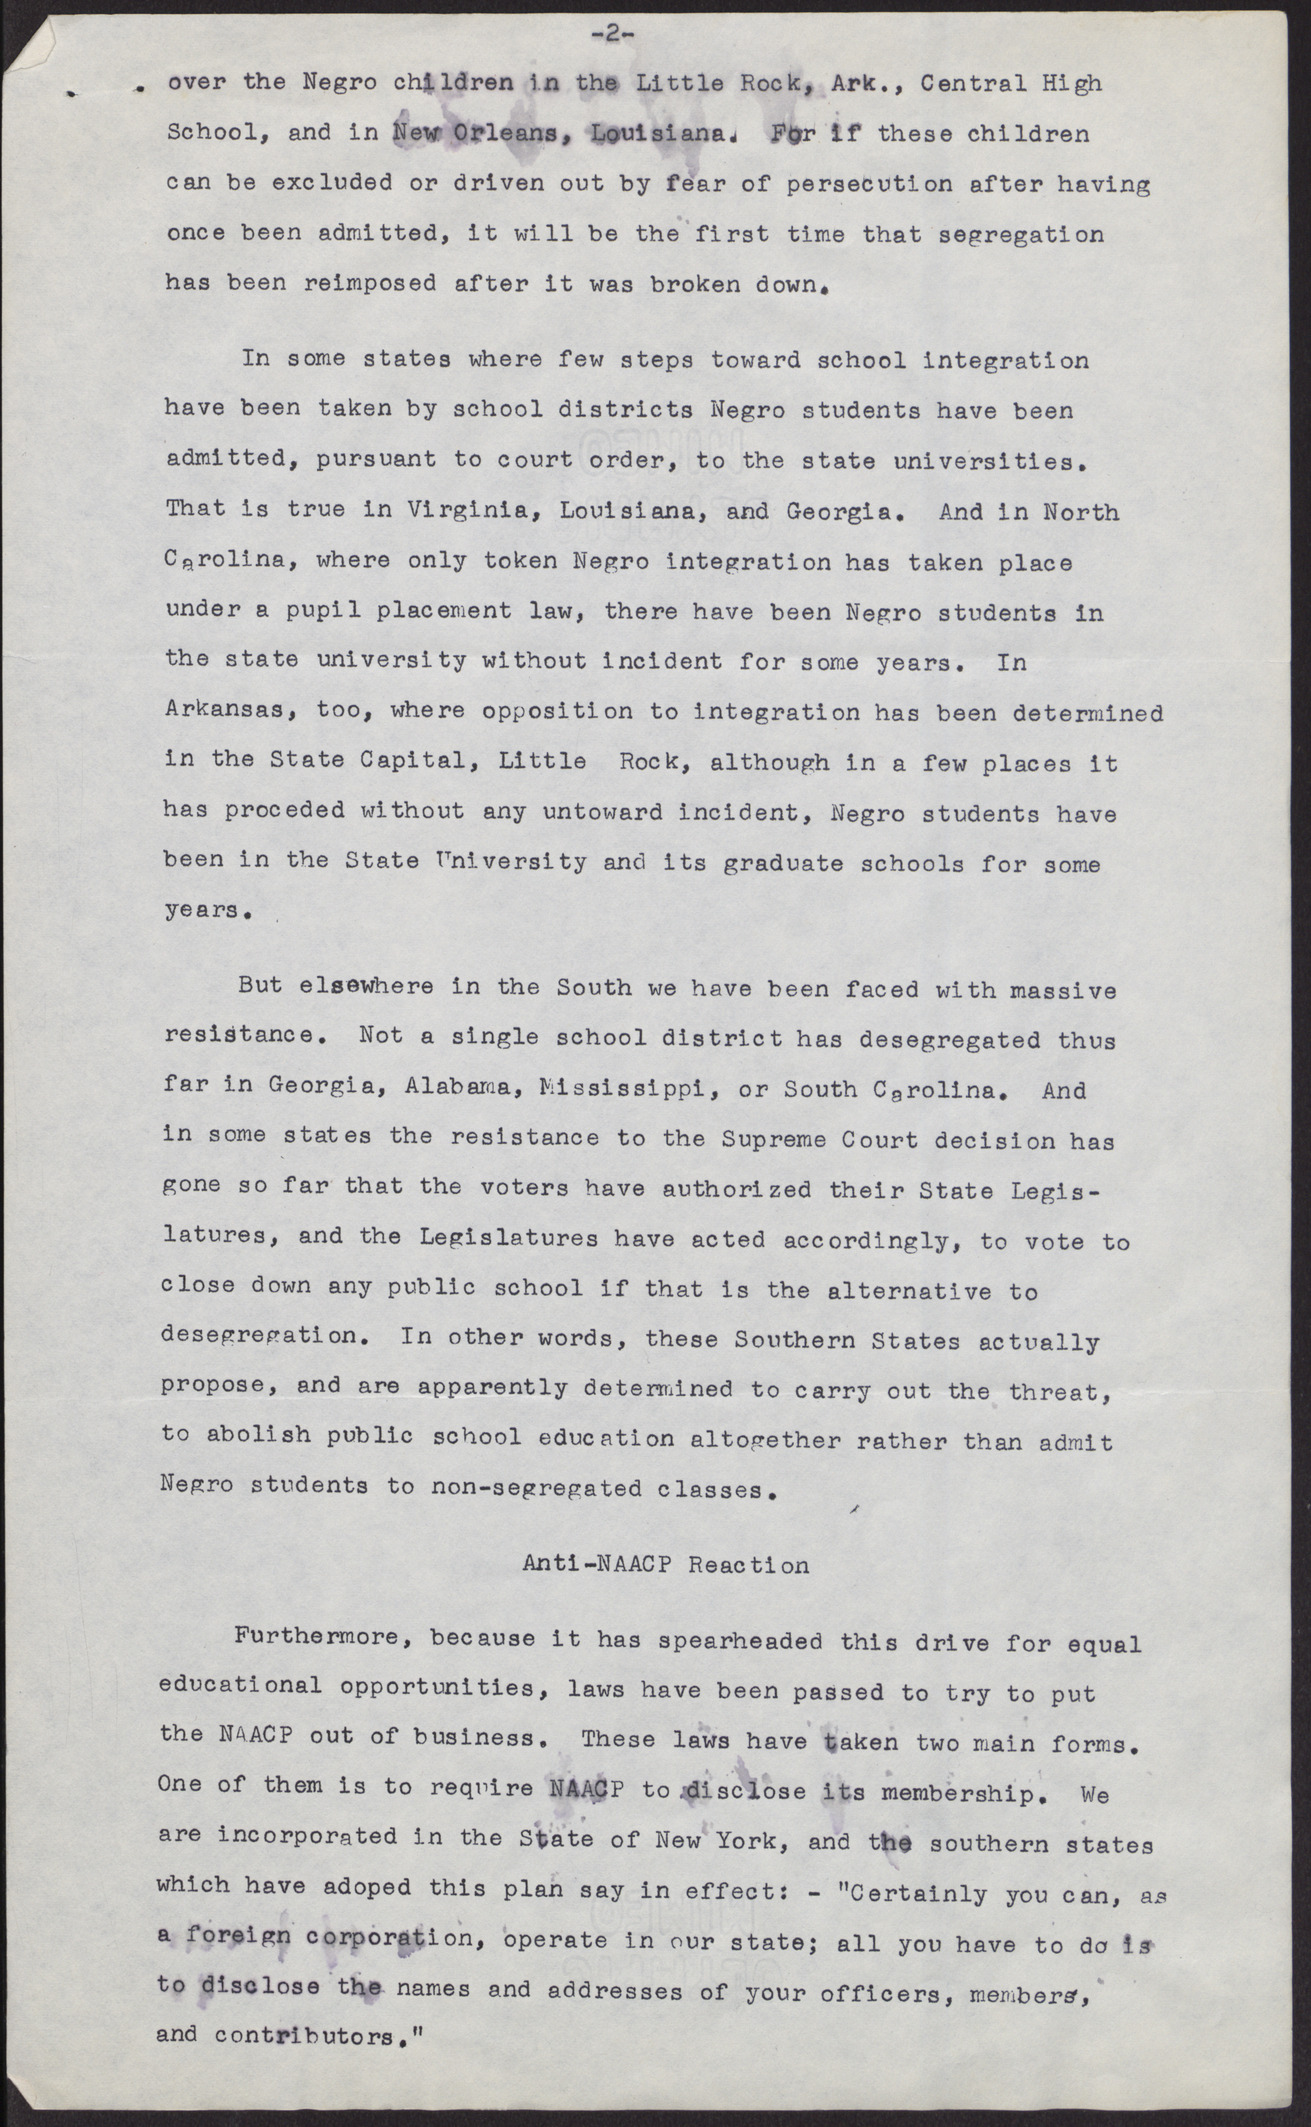 Speakers' notes: The NAACP and the Fight for Desegregation, page 2